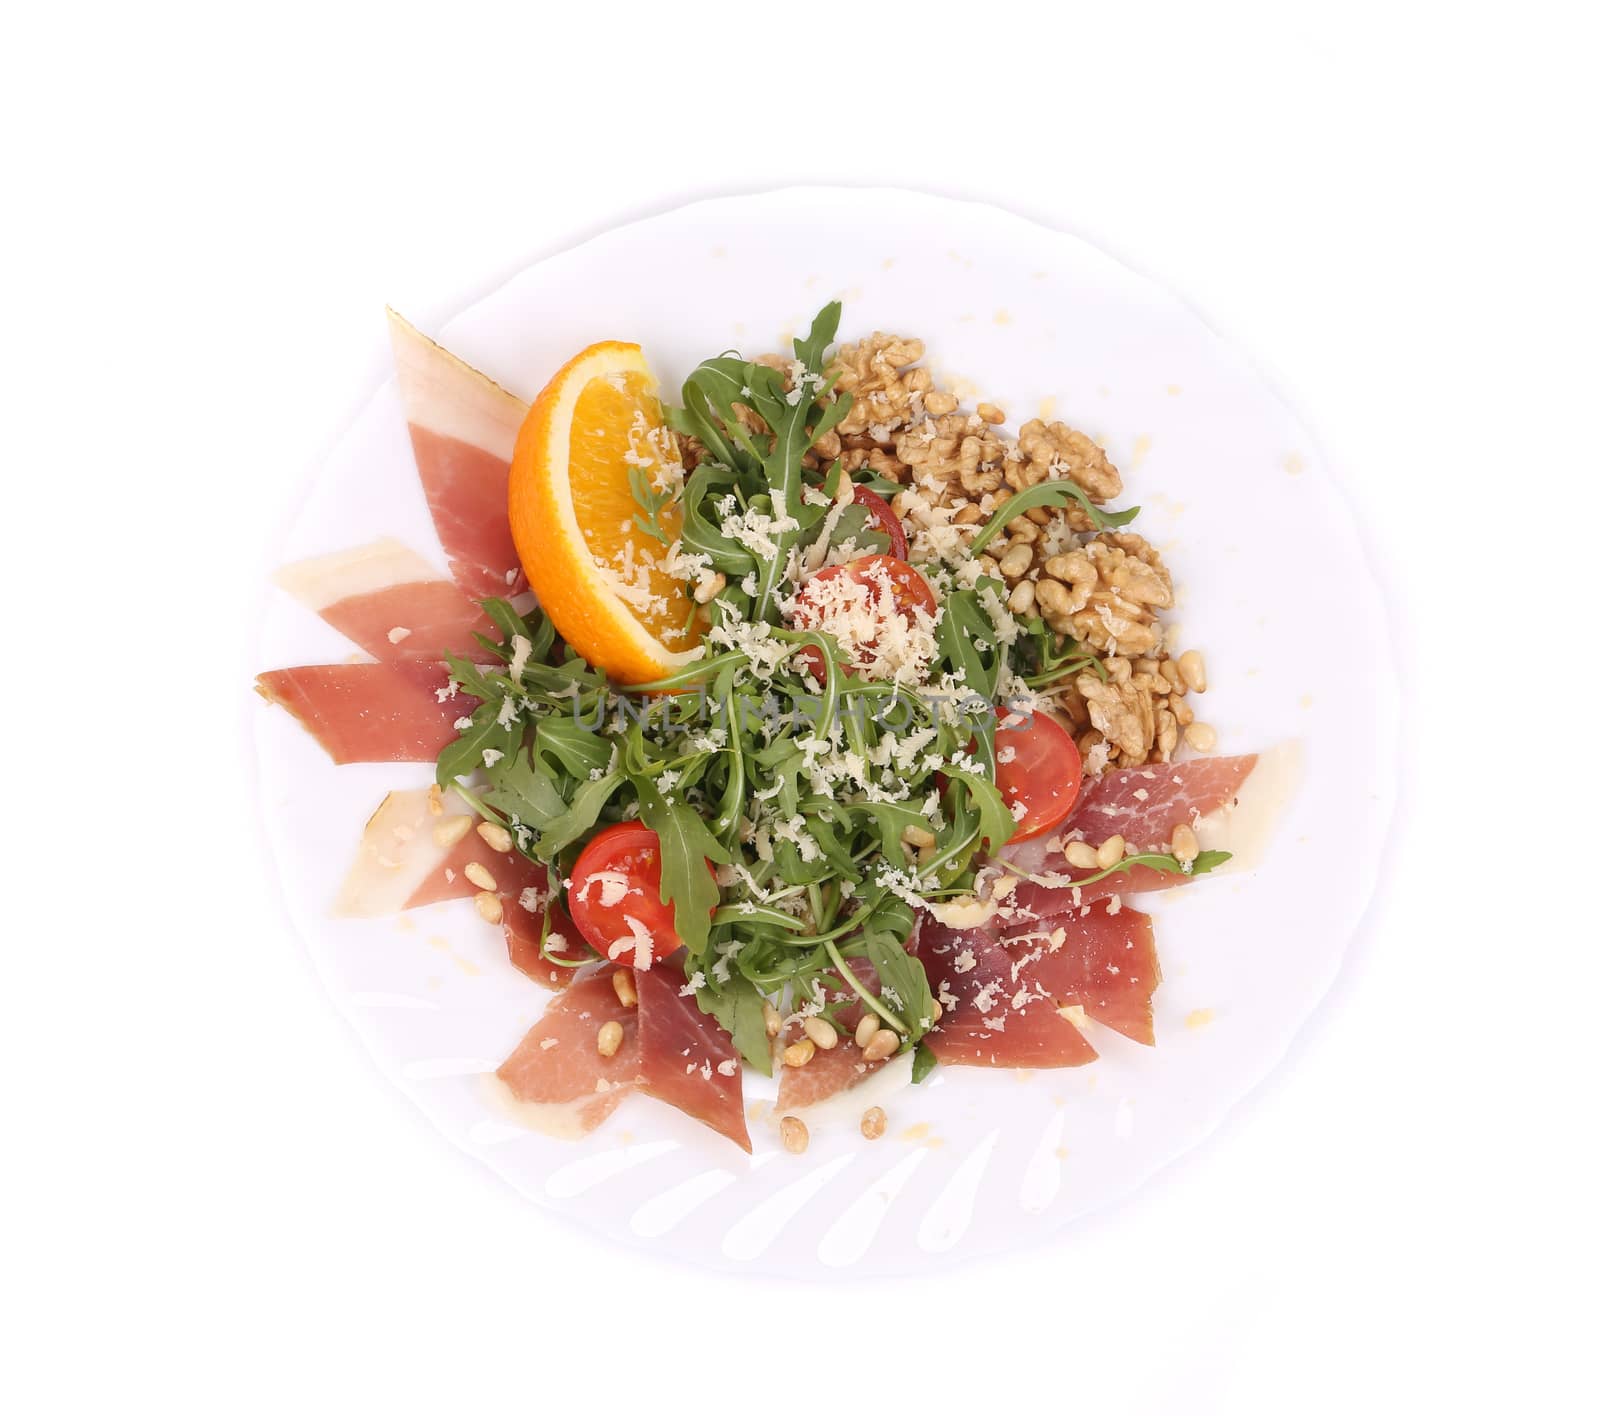 Salad with arugula and prosciutto. Isolated on a white background.